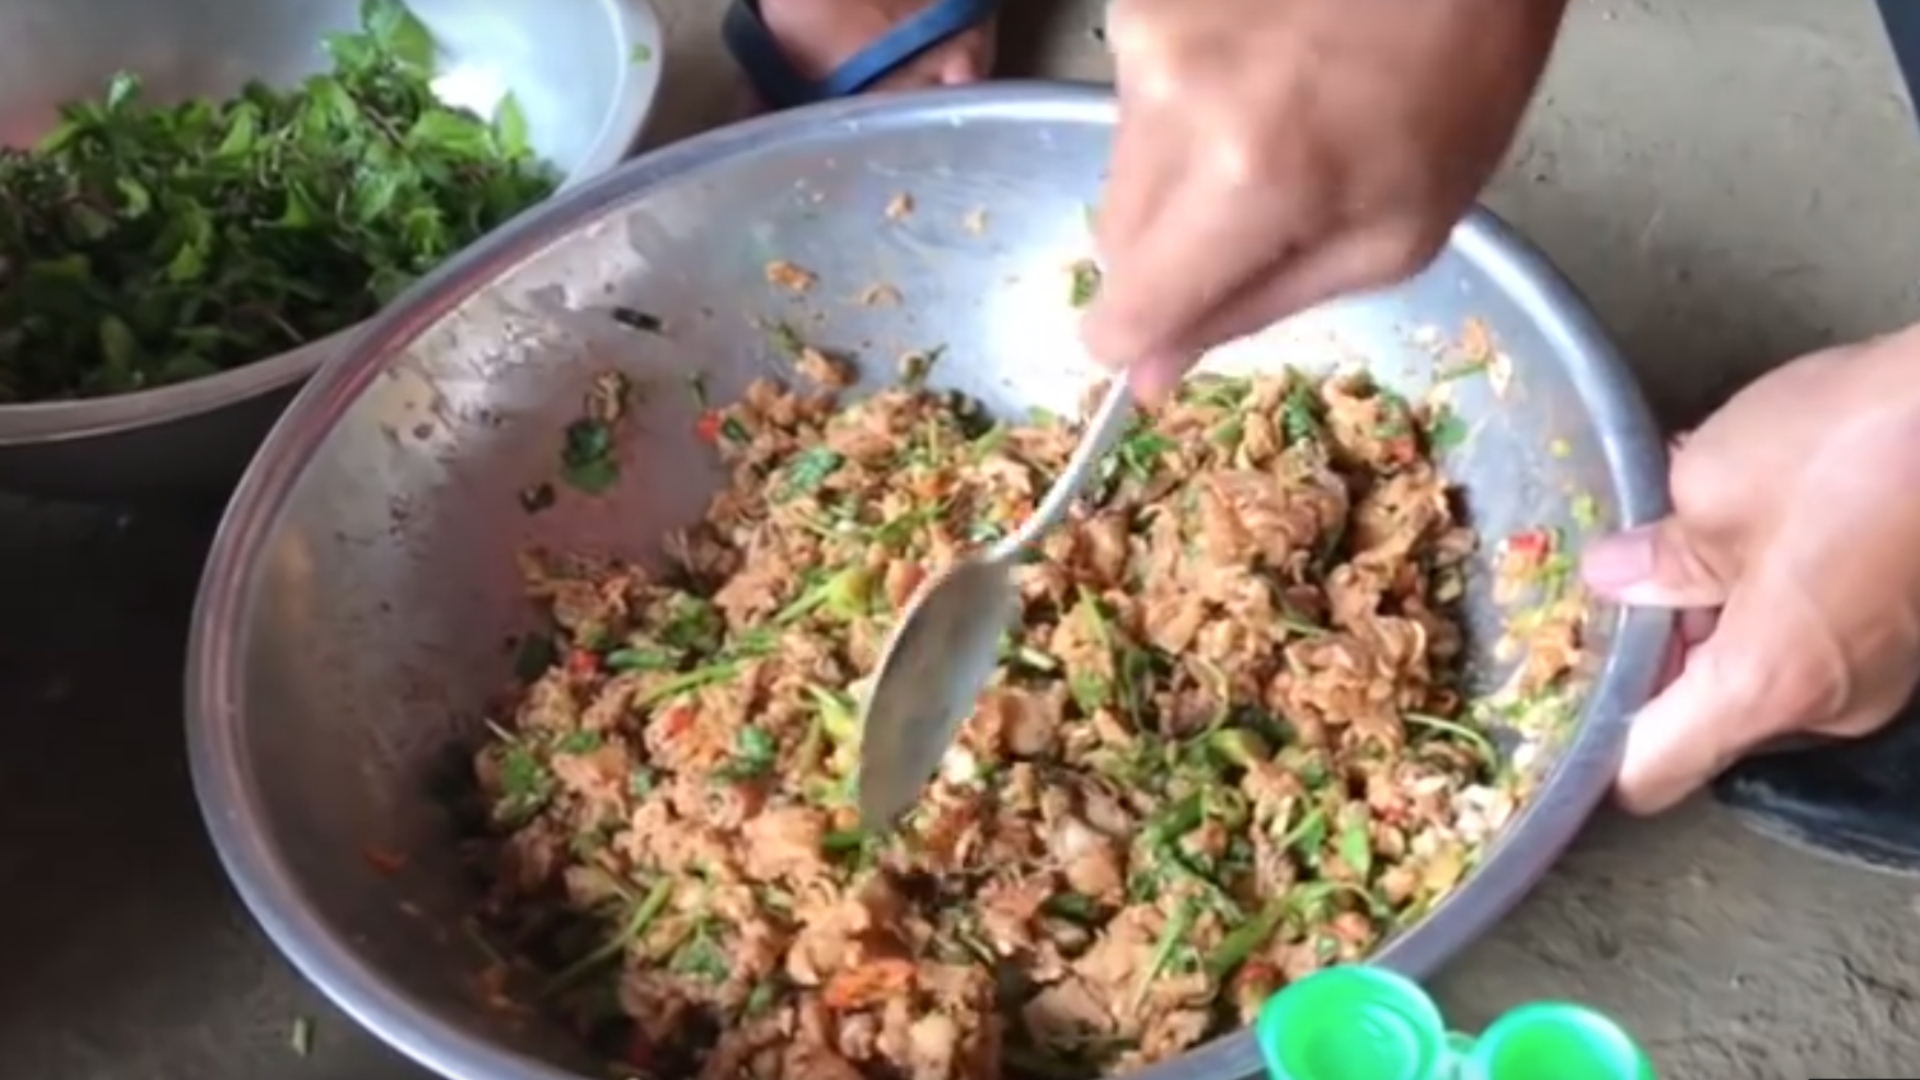 One Bite Of Thai Cuisine Linked To Liver Cancer Risk